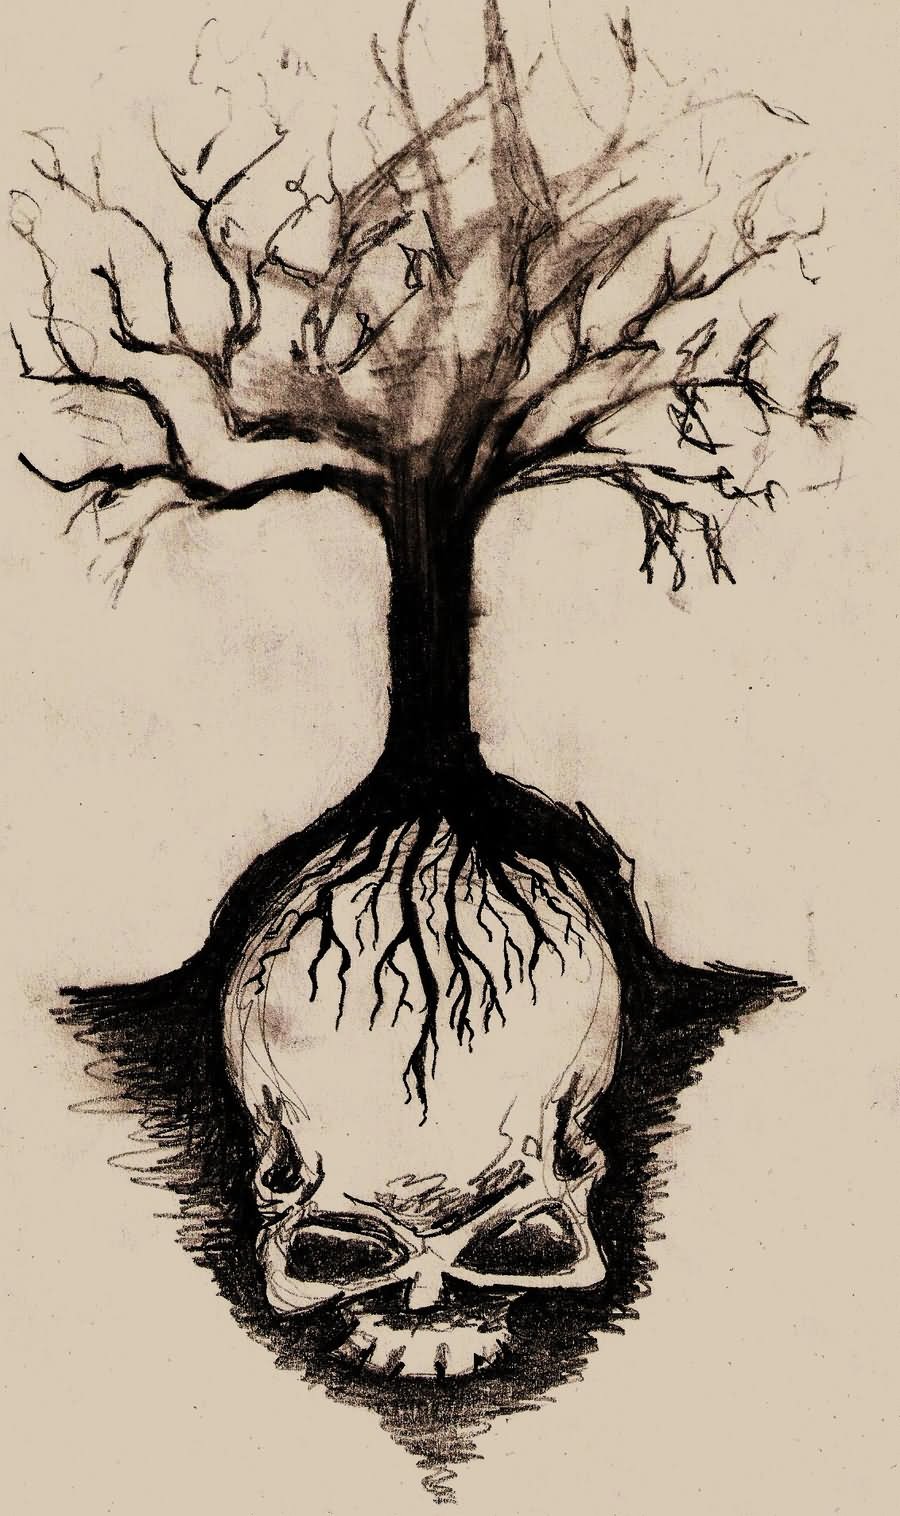 Black Skull In Without Leave Tree Root Tattoo Design By Linda